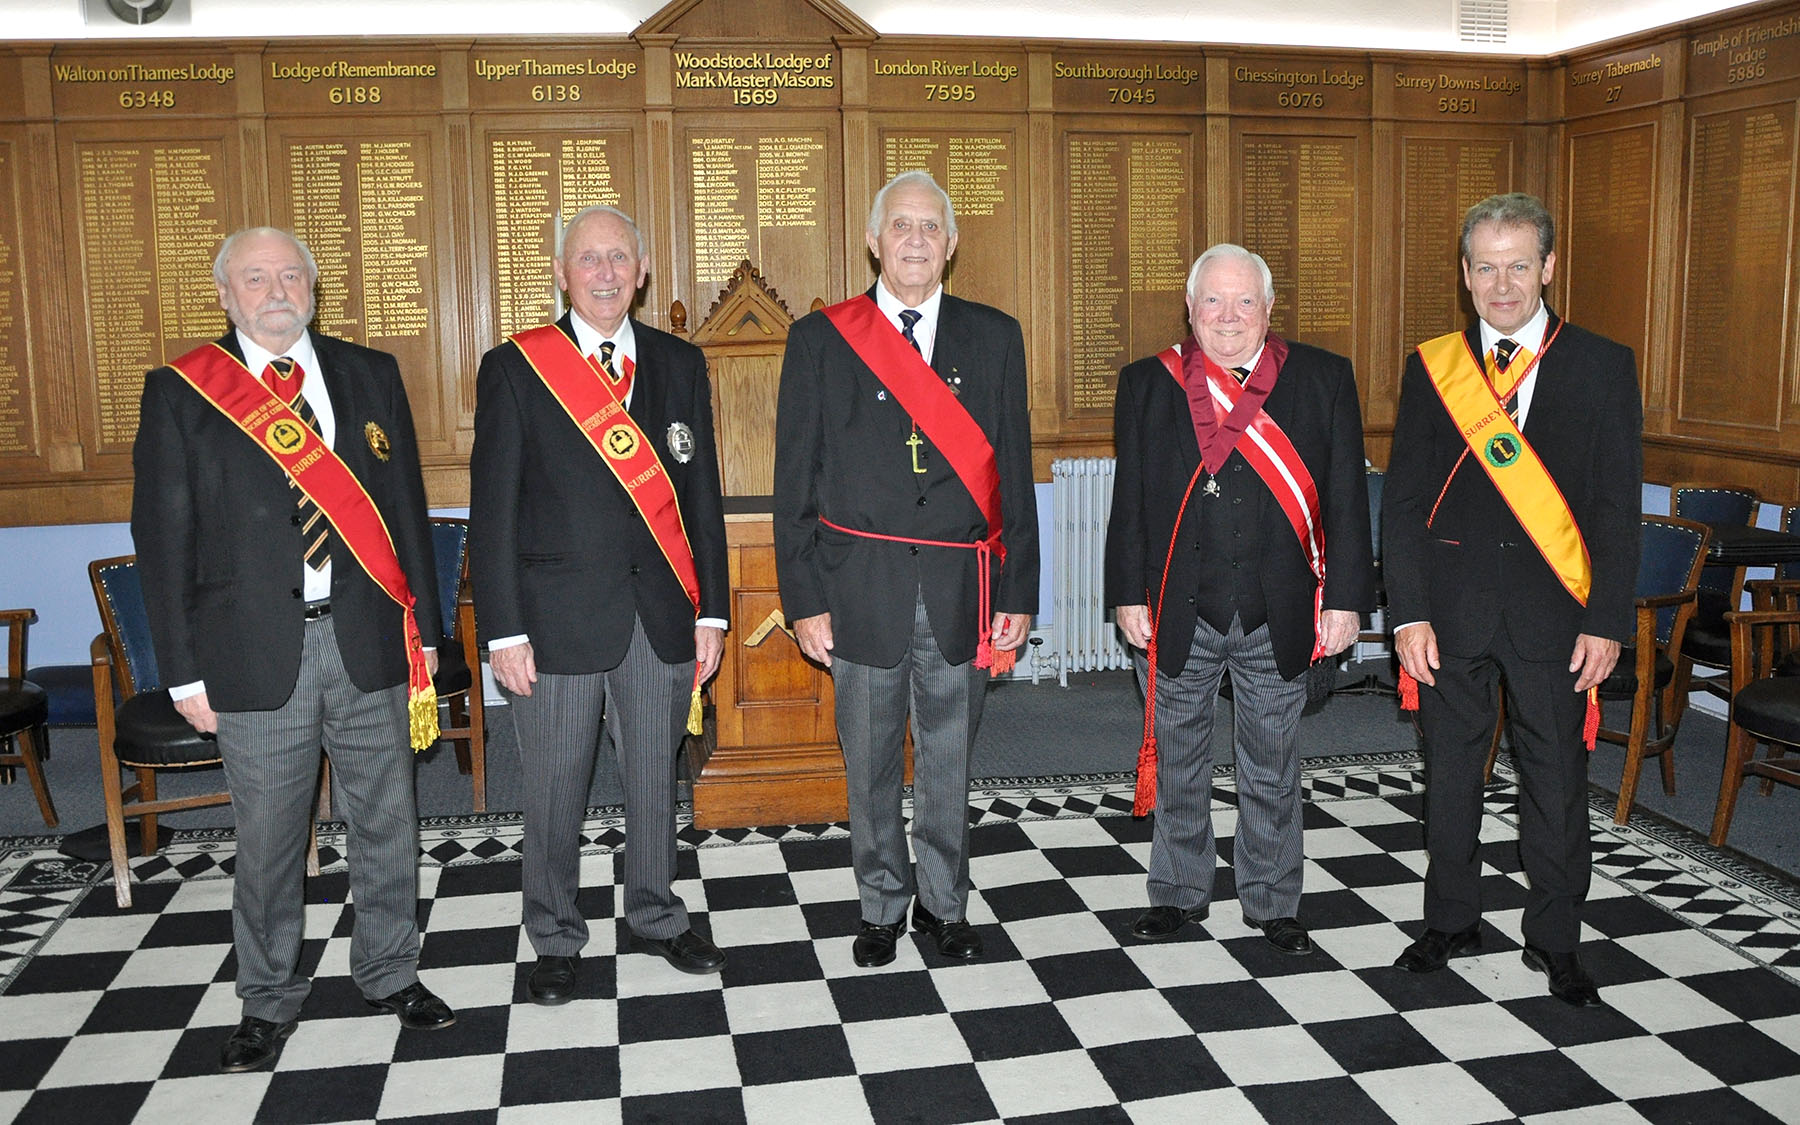 More Candidates for Surrey Consistory